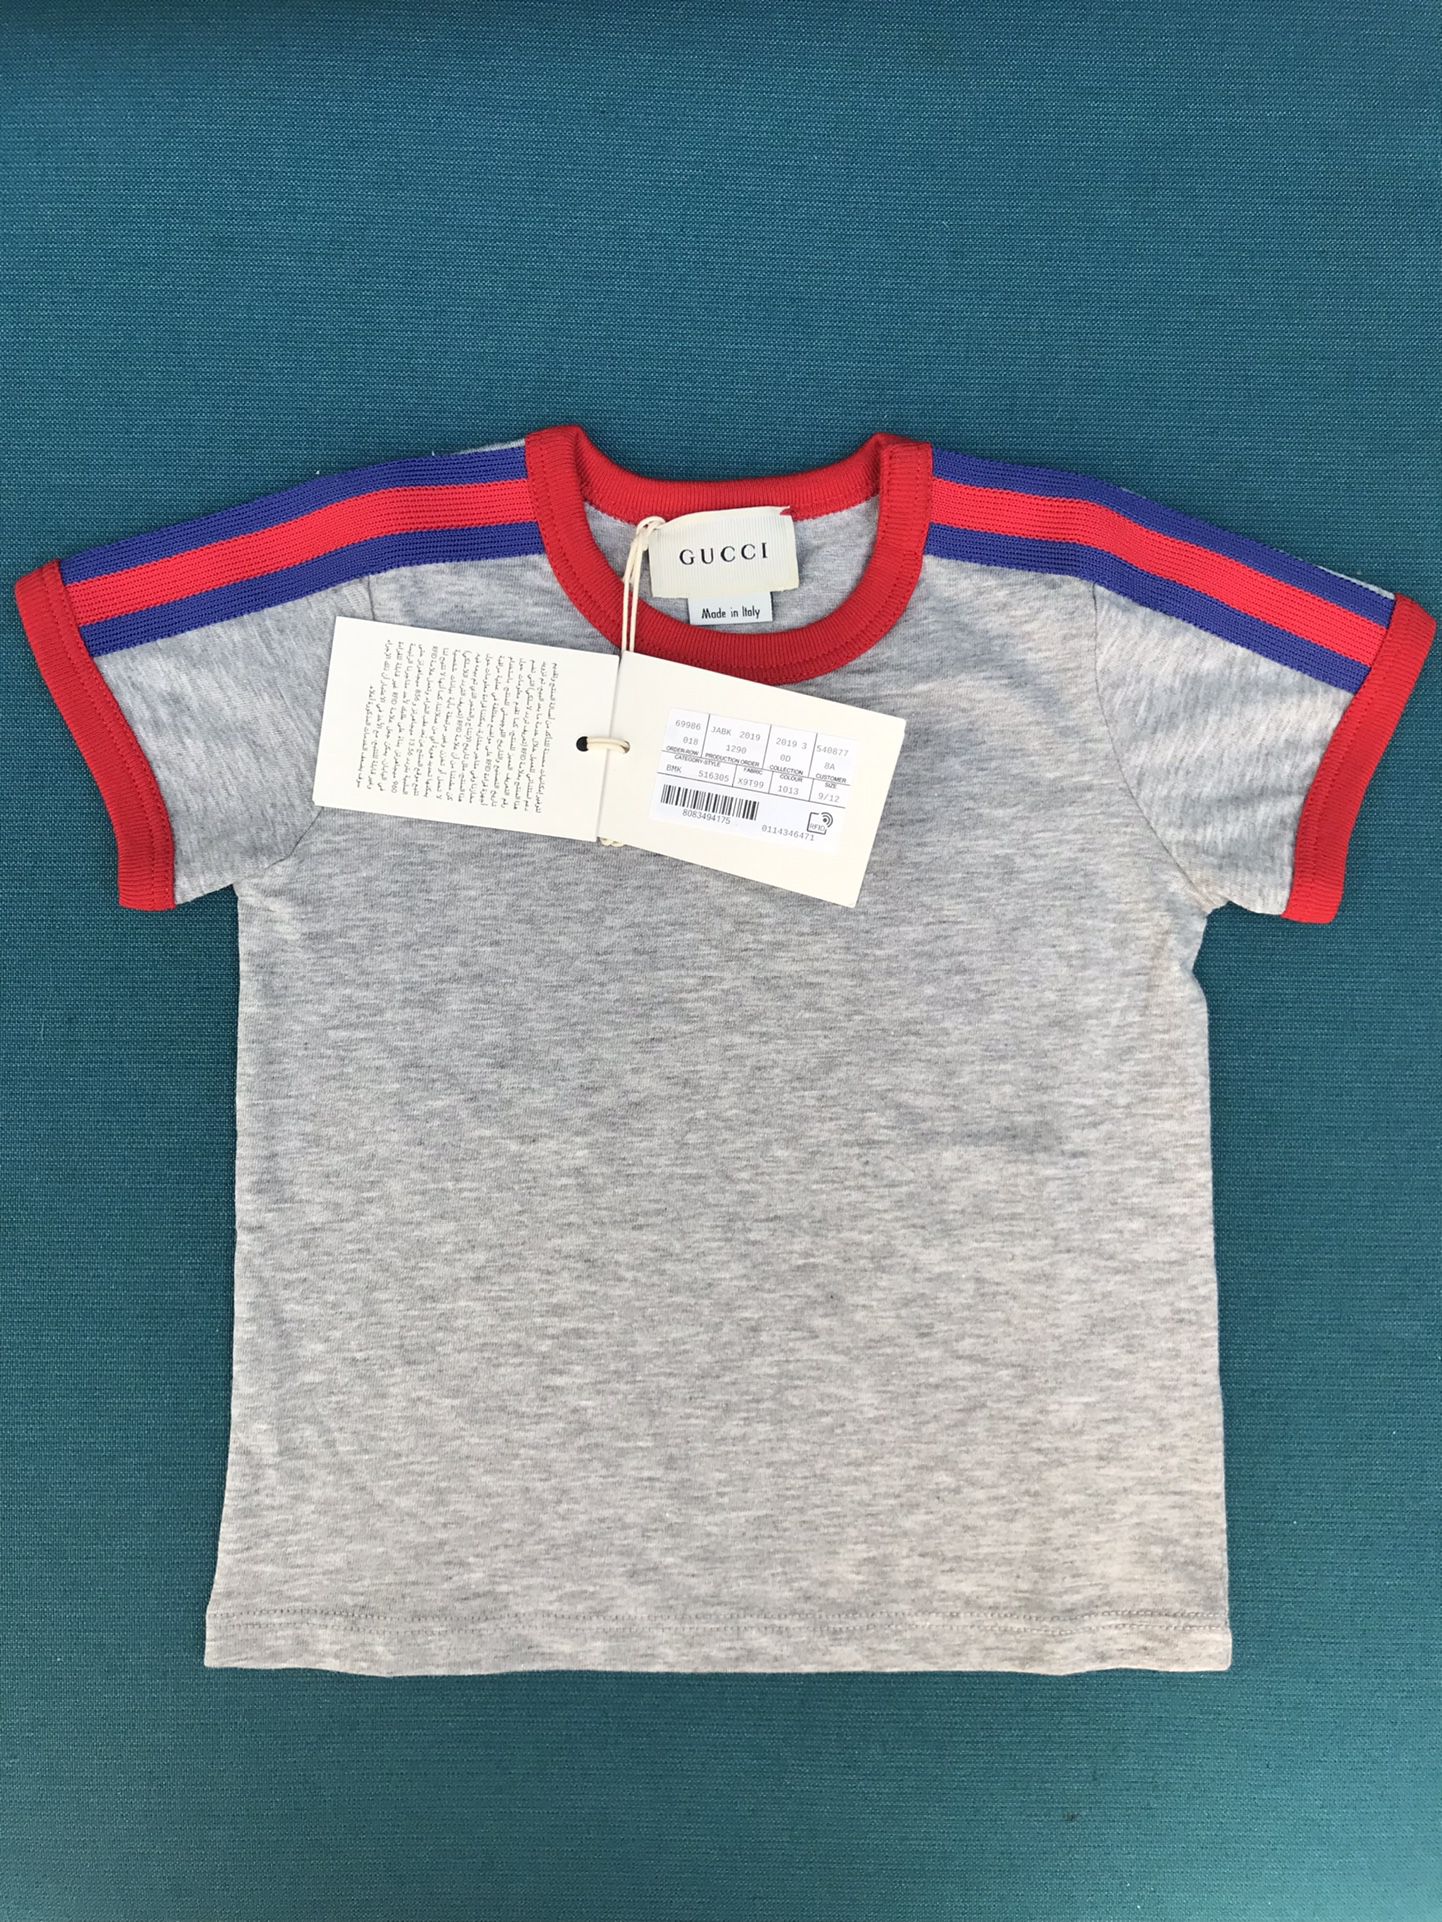 Baby Boy Shirt 9-12 Months (Brand New With Tags)